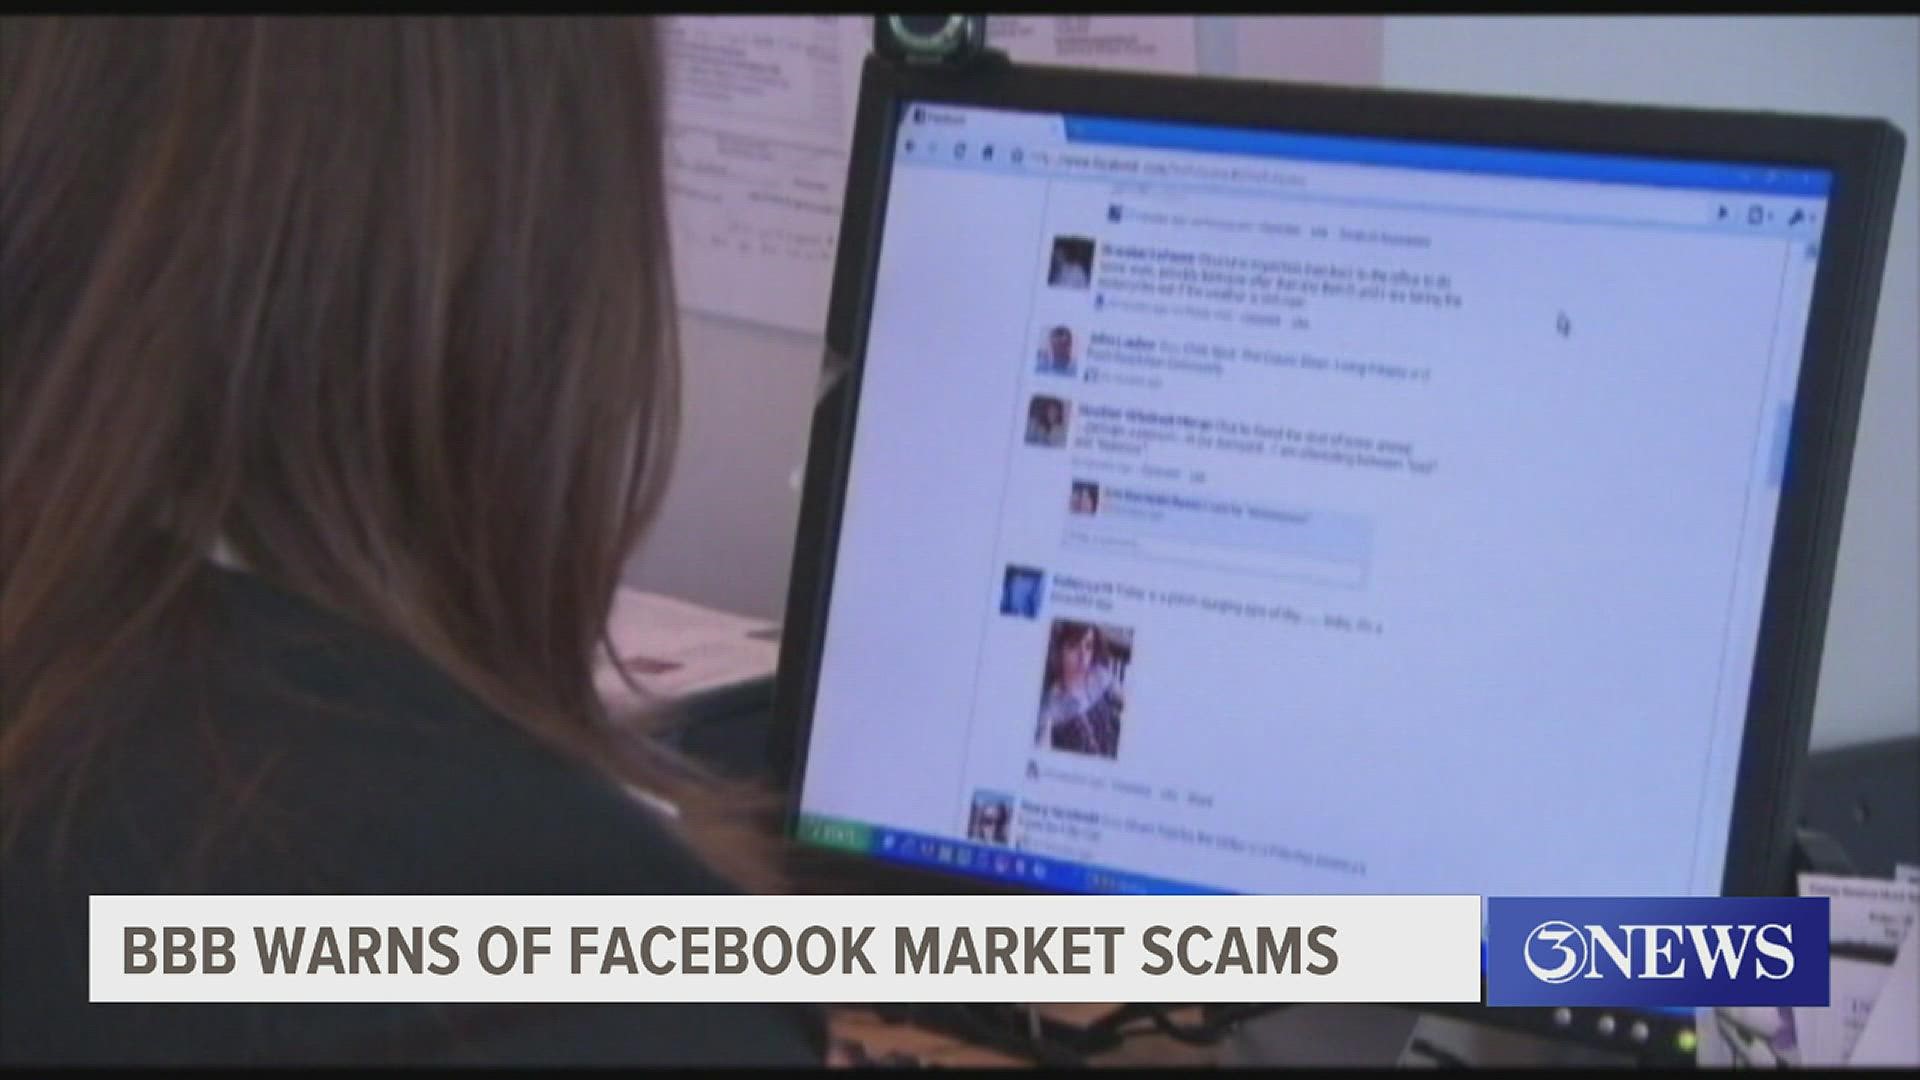 Facebook scams, where someone asks you to share an often heartbreaking or attention-grabbing post, are on the rise.